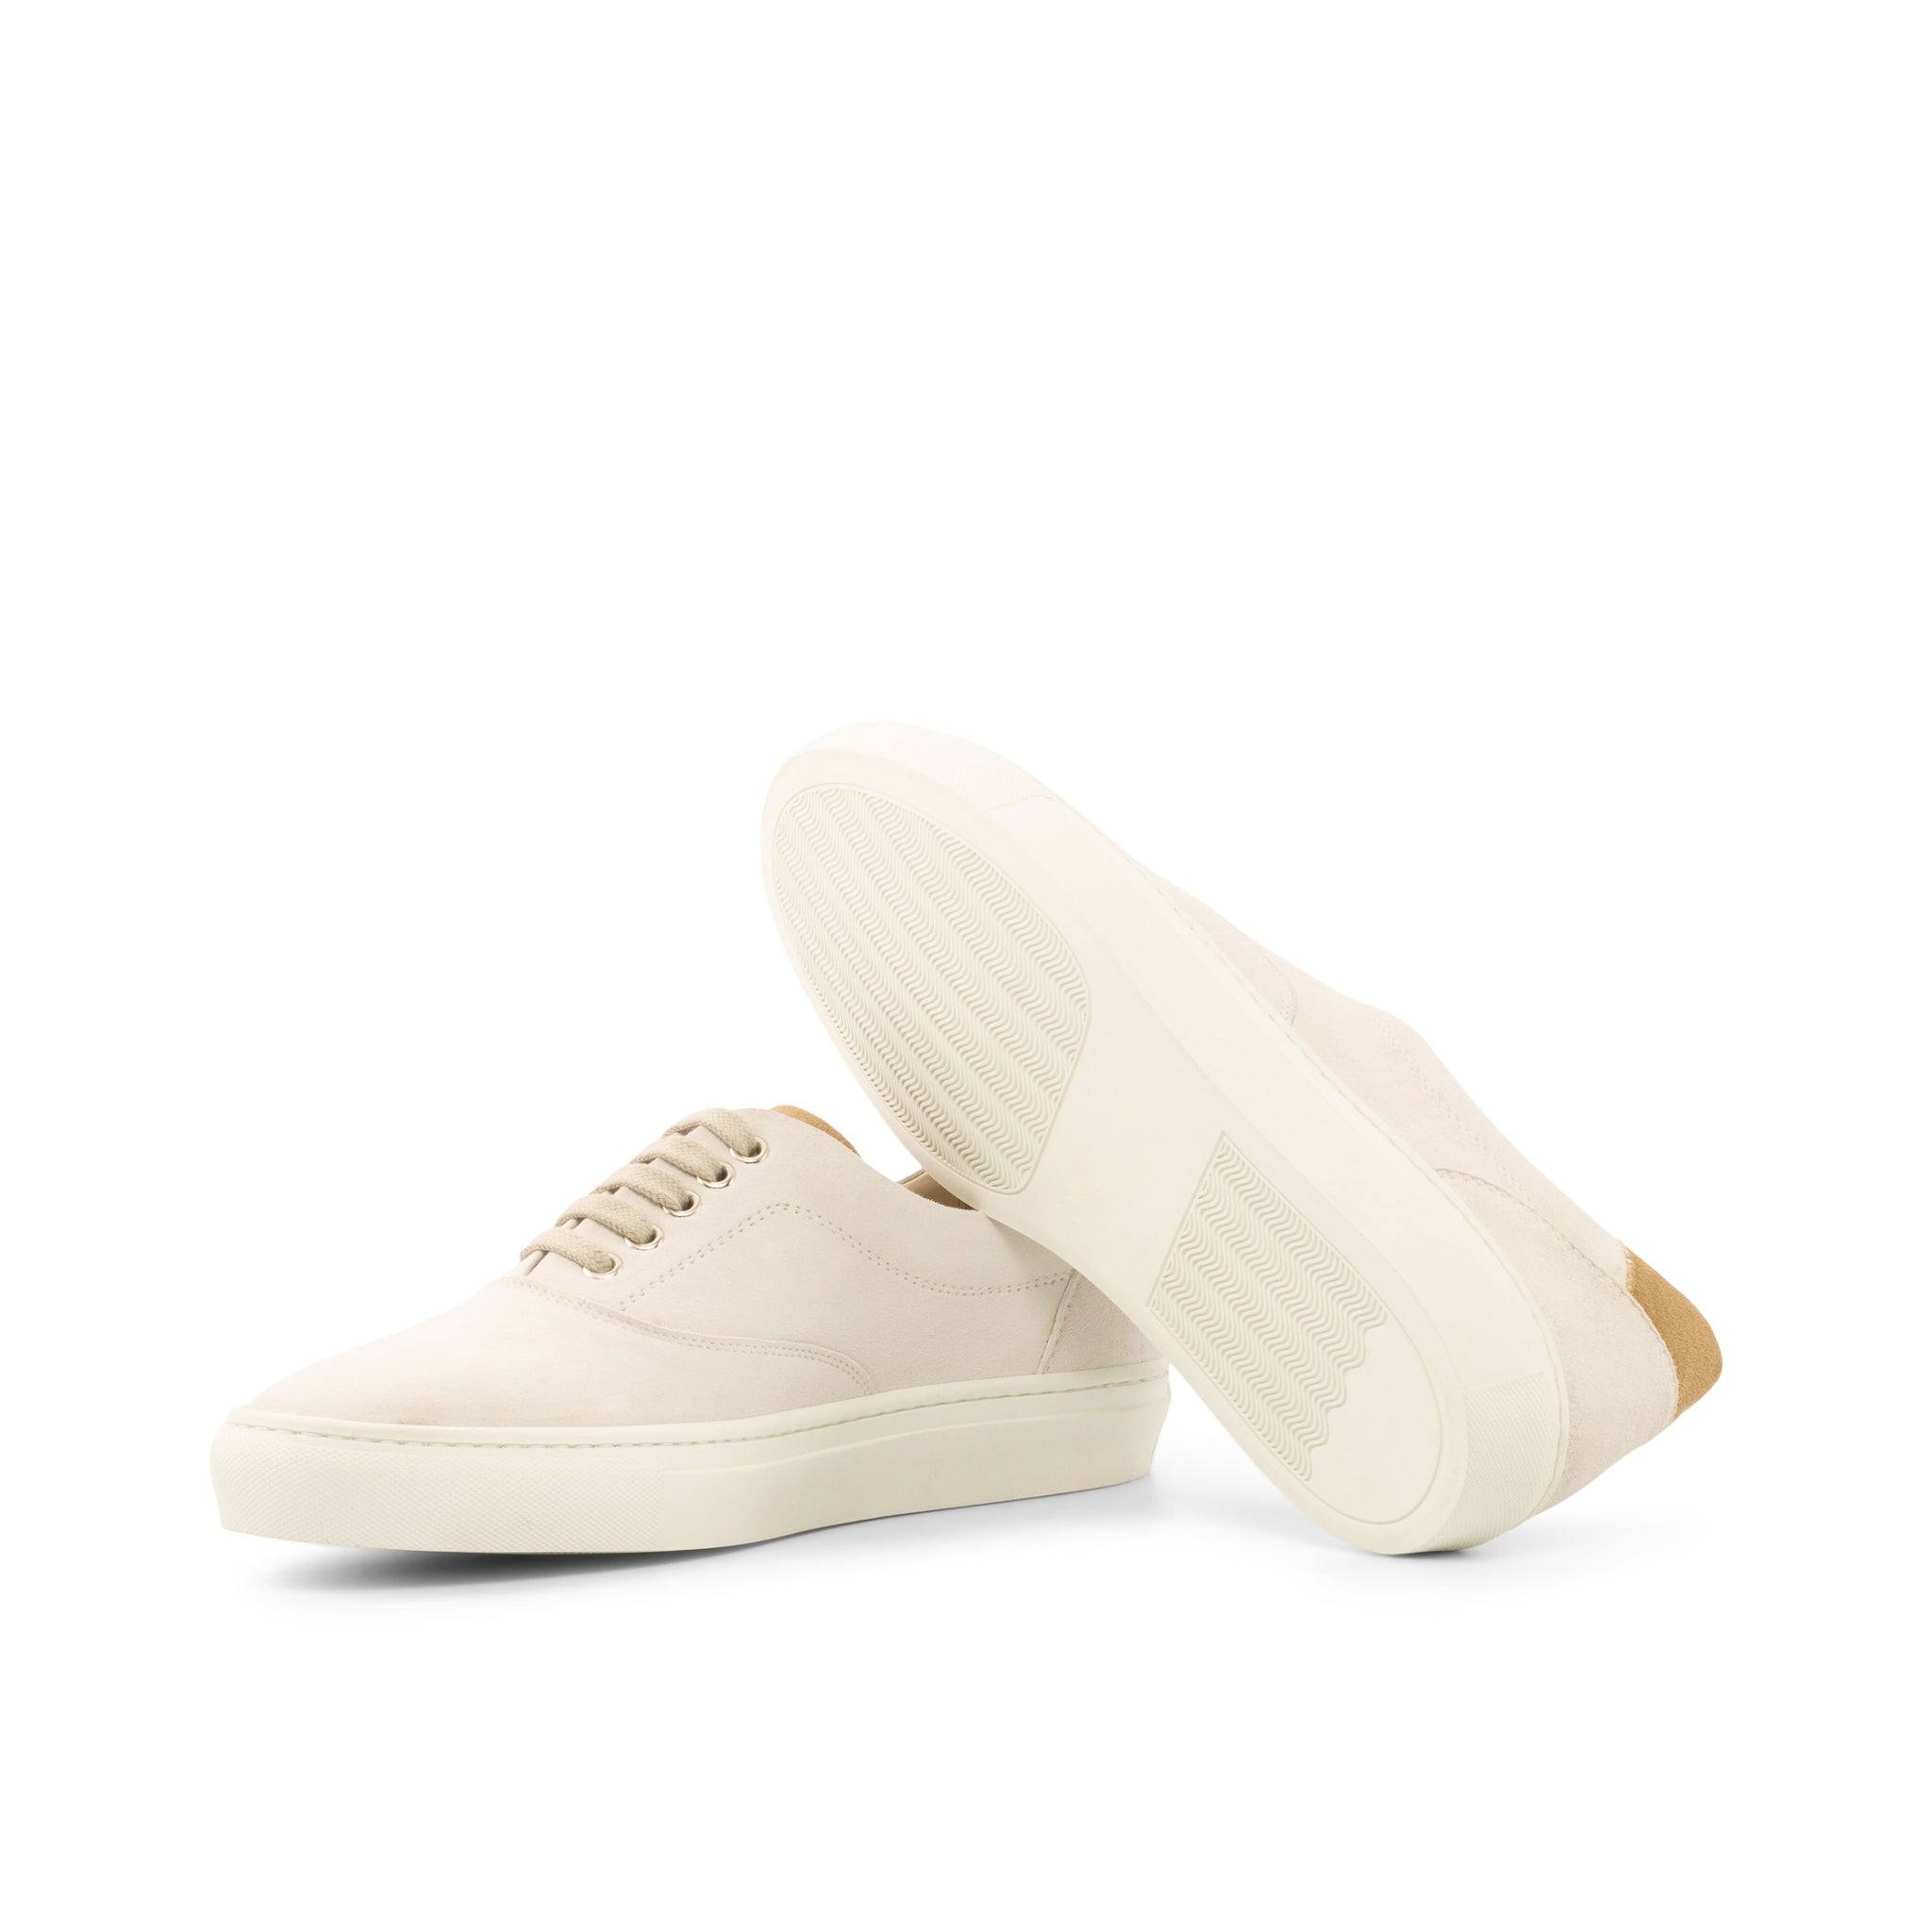 Unique Handcrafted Top Sider Sneaker - Kid Suede White-Kid Suede Camel